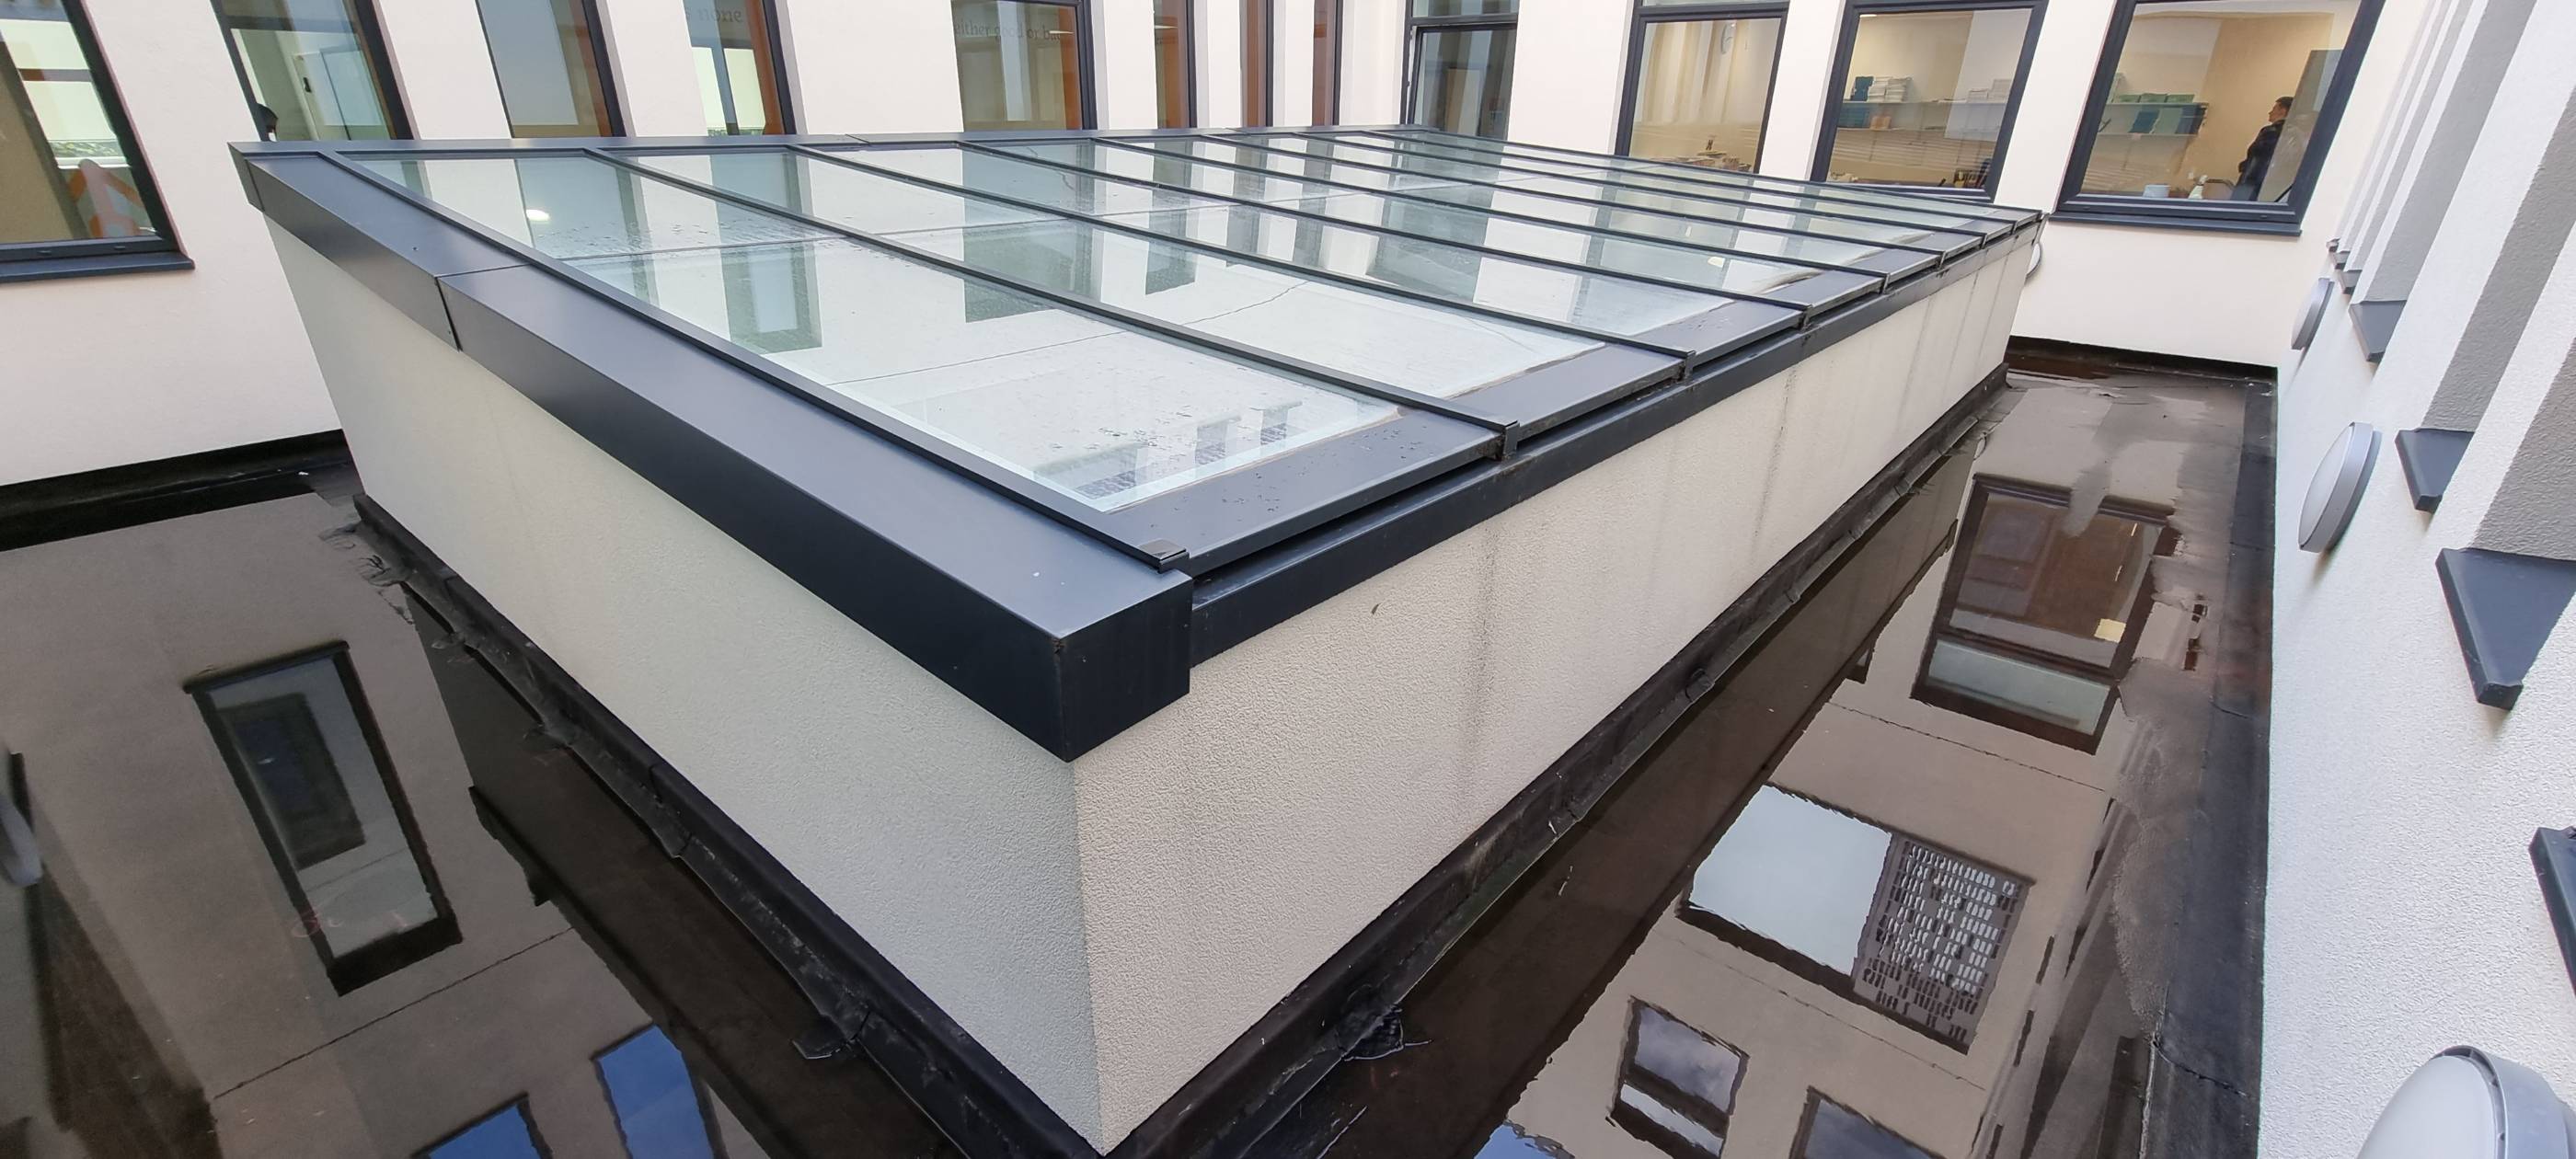 Rooflight - Monopitch & Dual Pitched